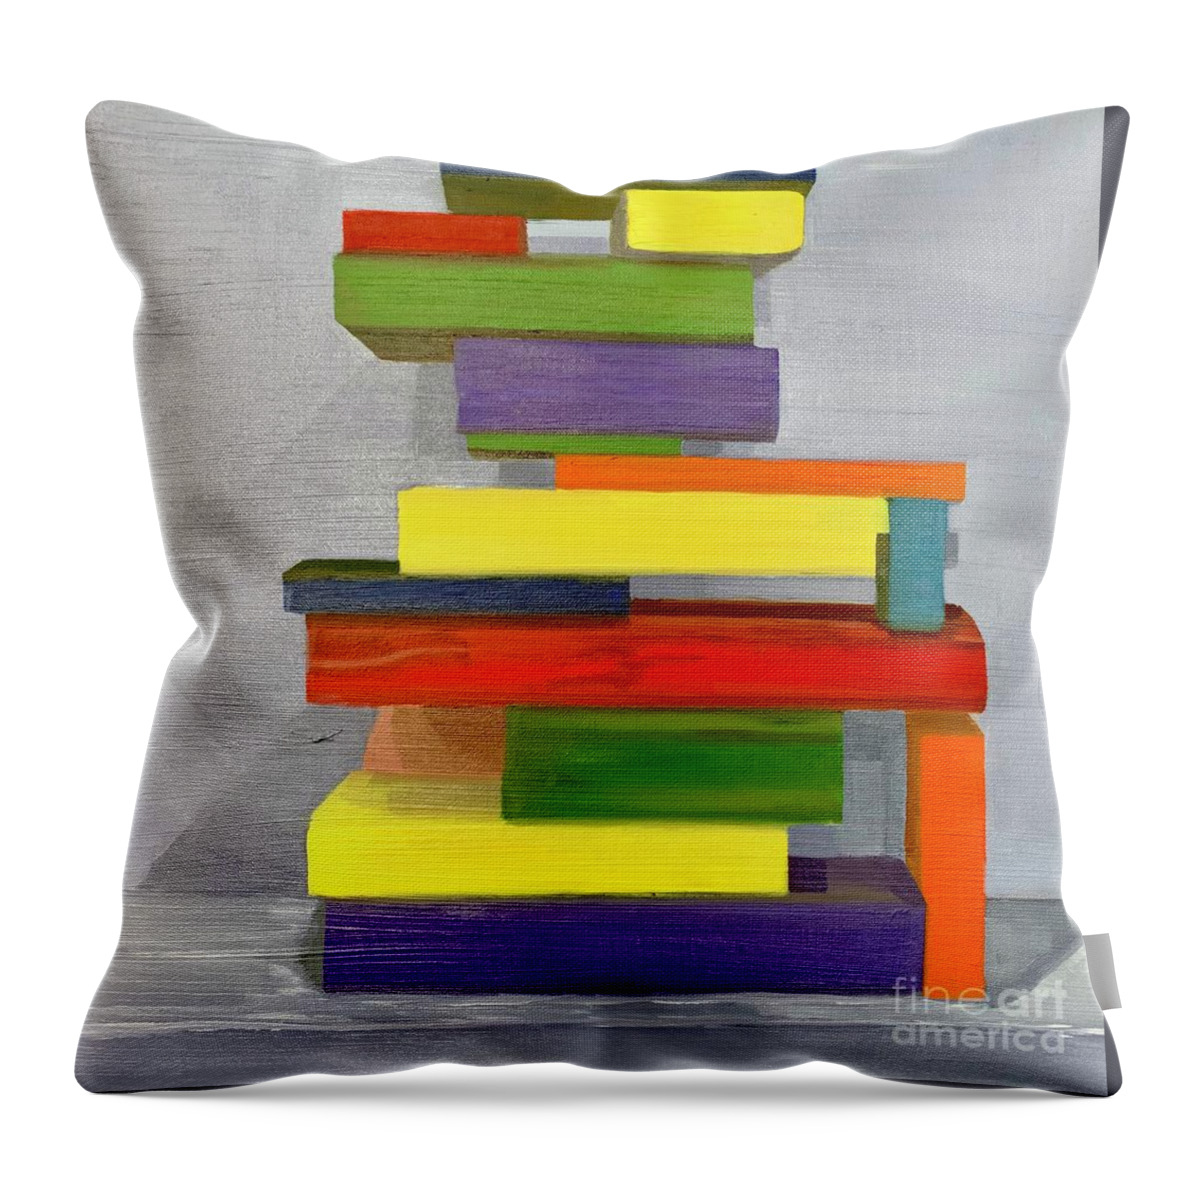 Blocks Throw Pillow featuring the painting Happiness by Jennefer Chaudhry